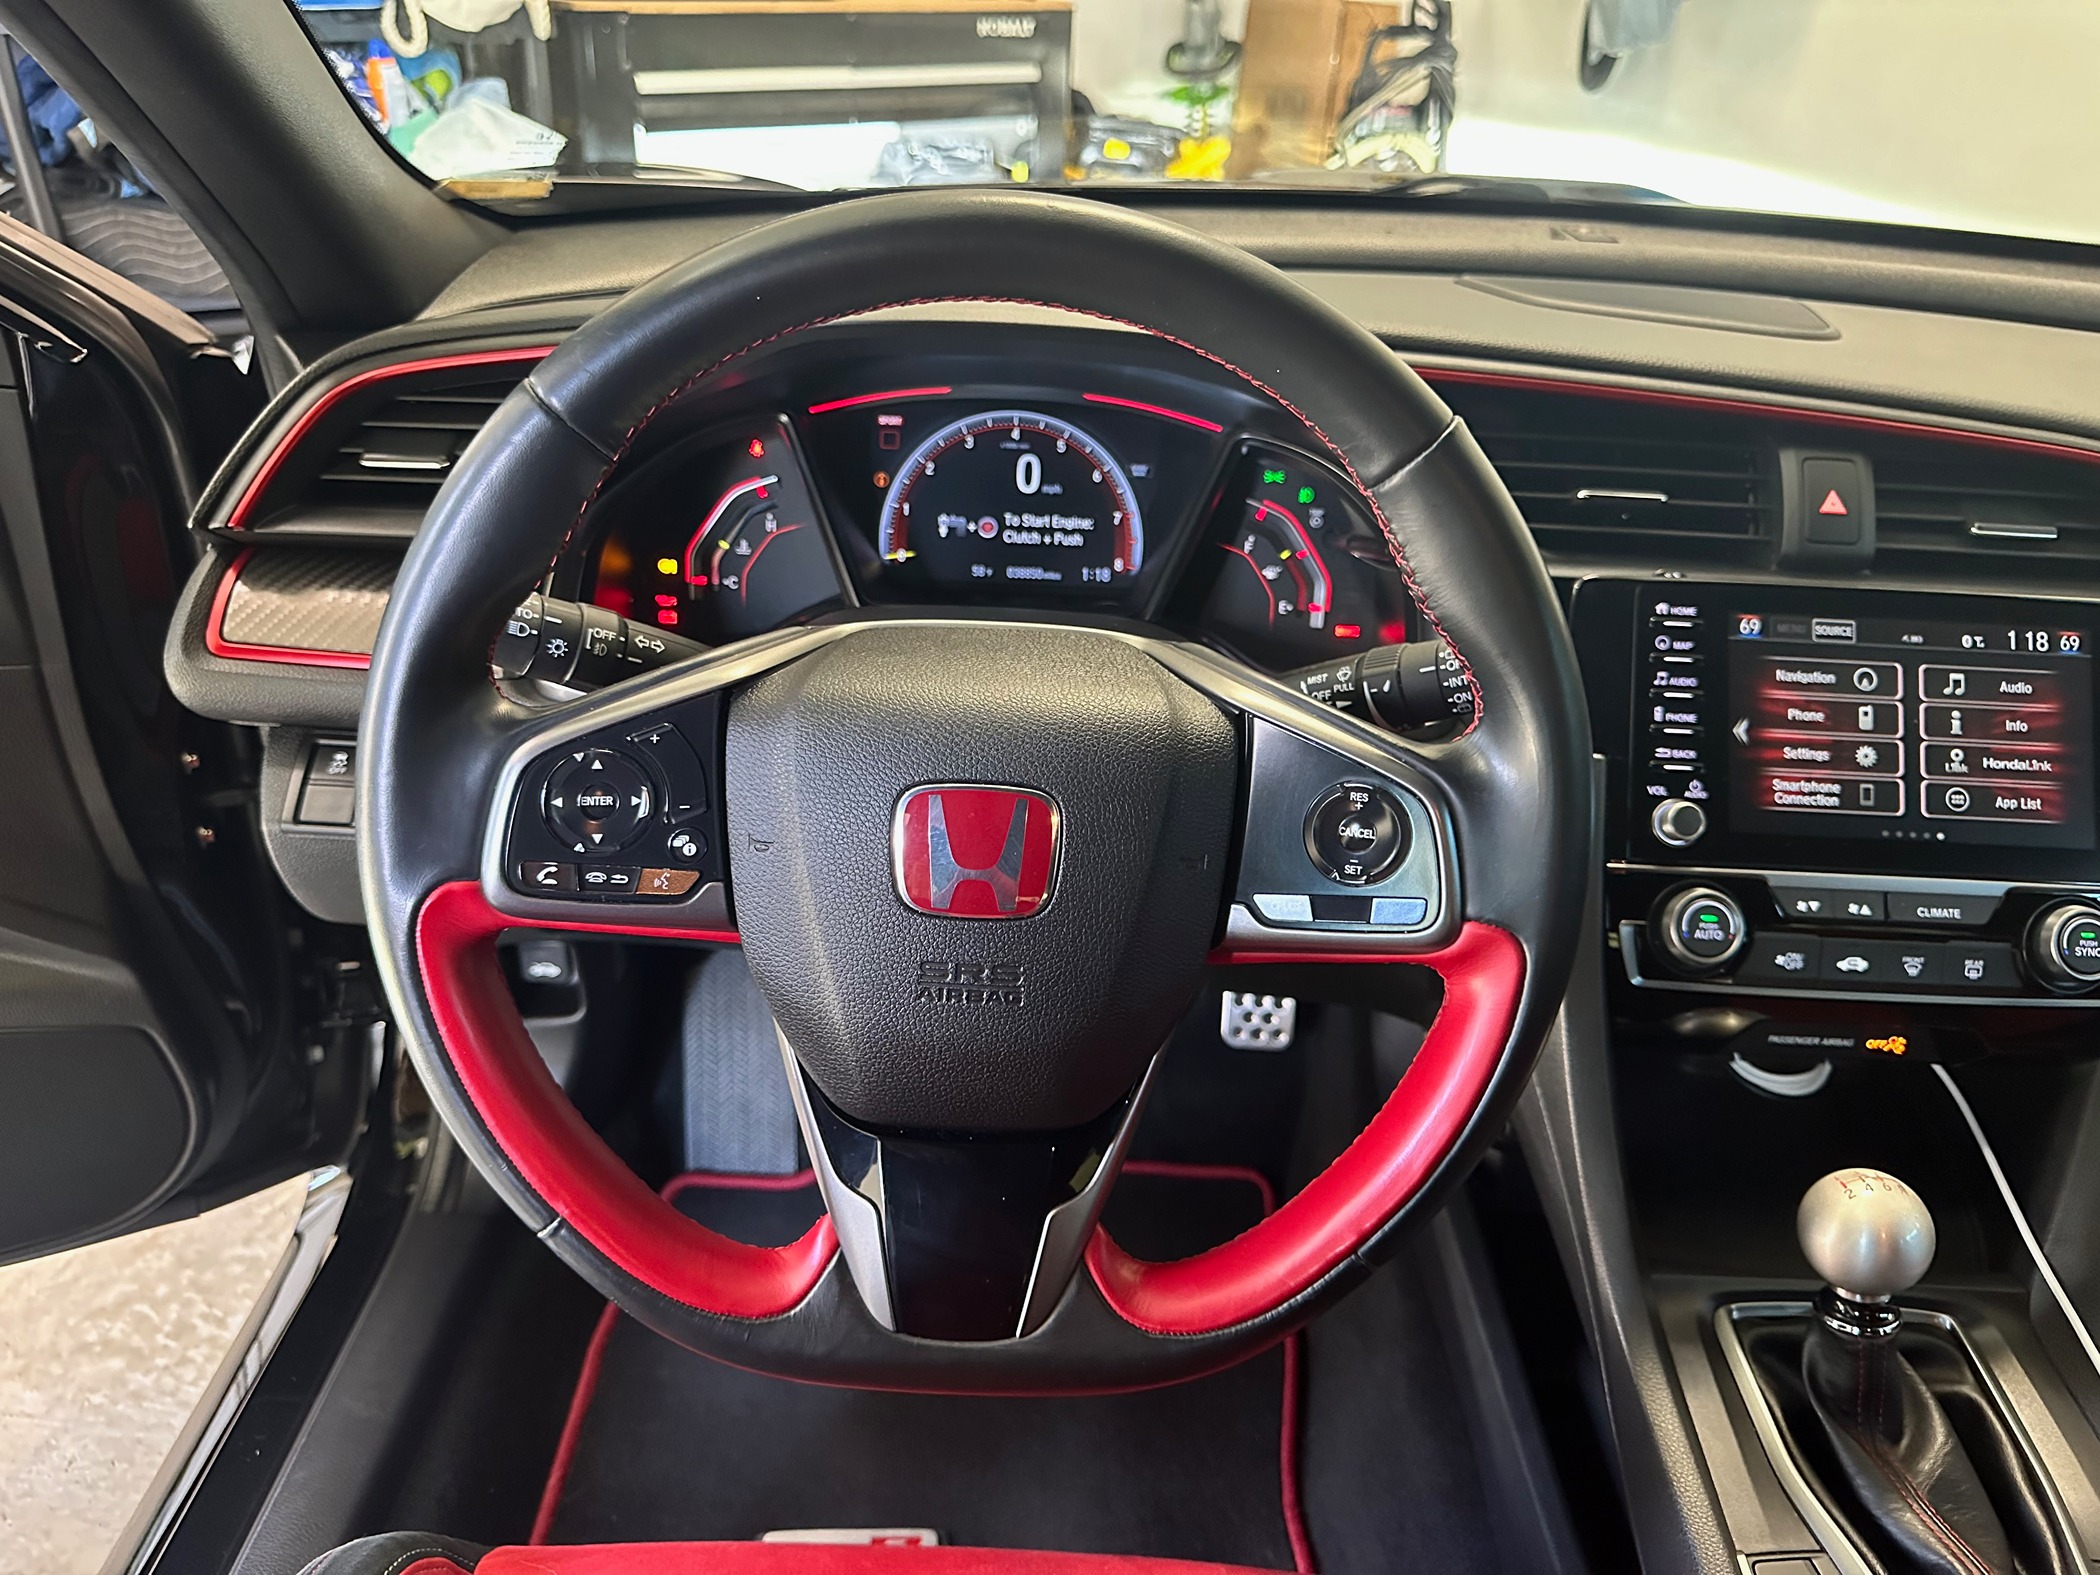 Honda Civic 10th gen Sold. 2019 Civic Type R for sale IMG_8159